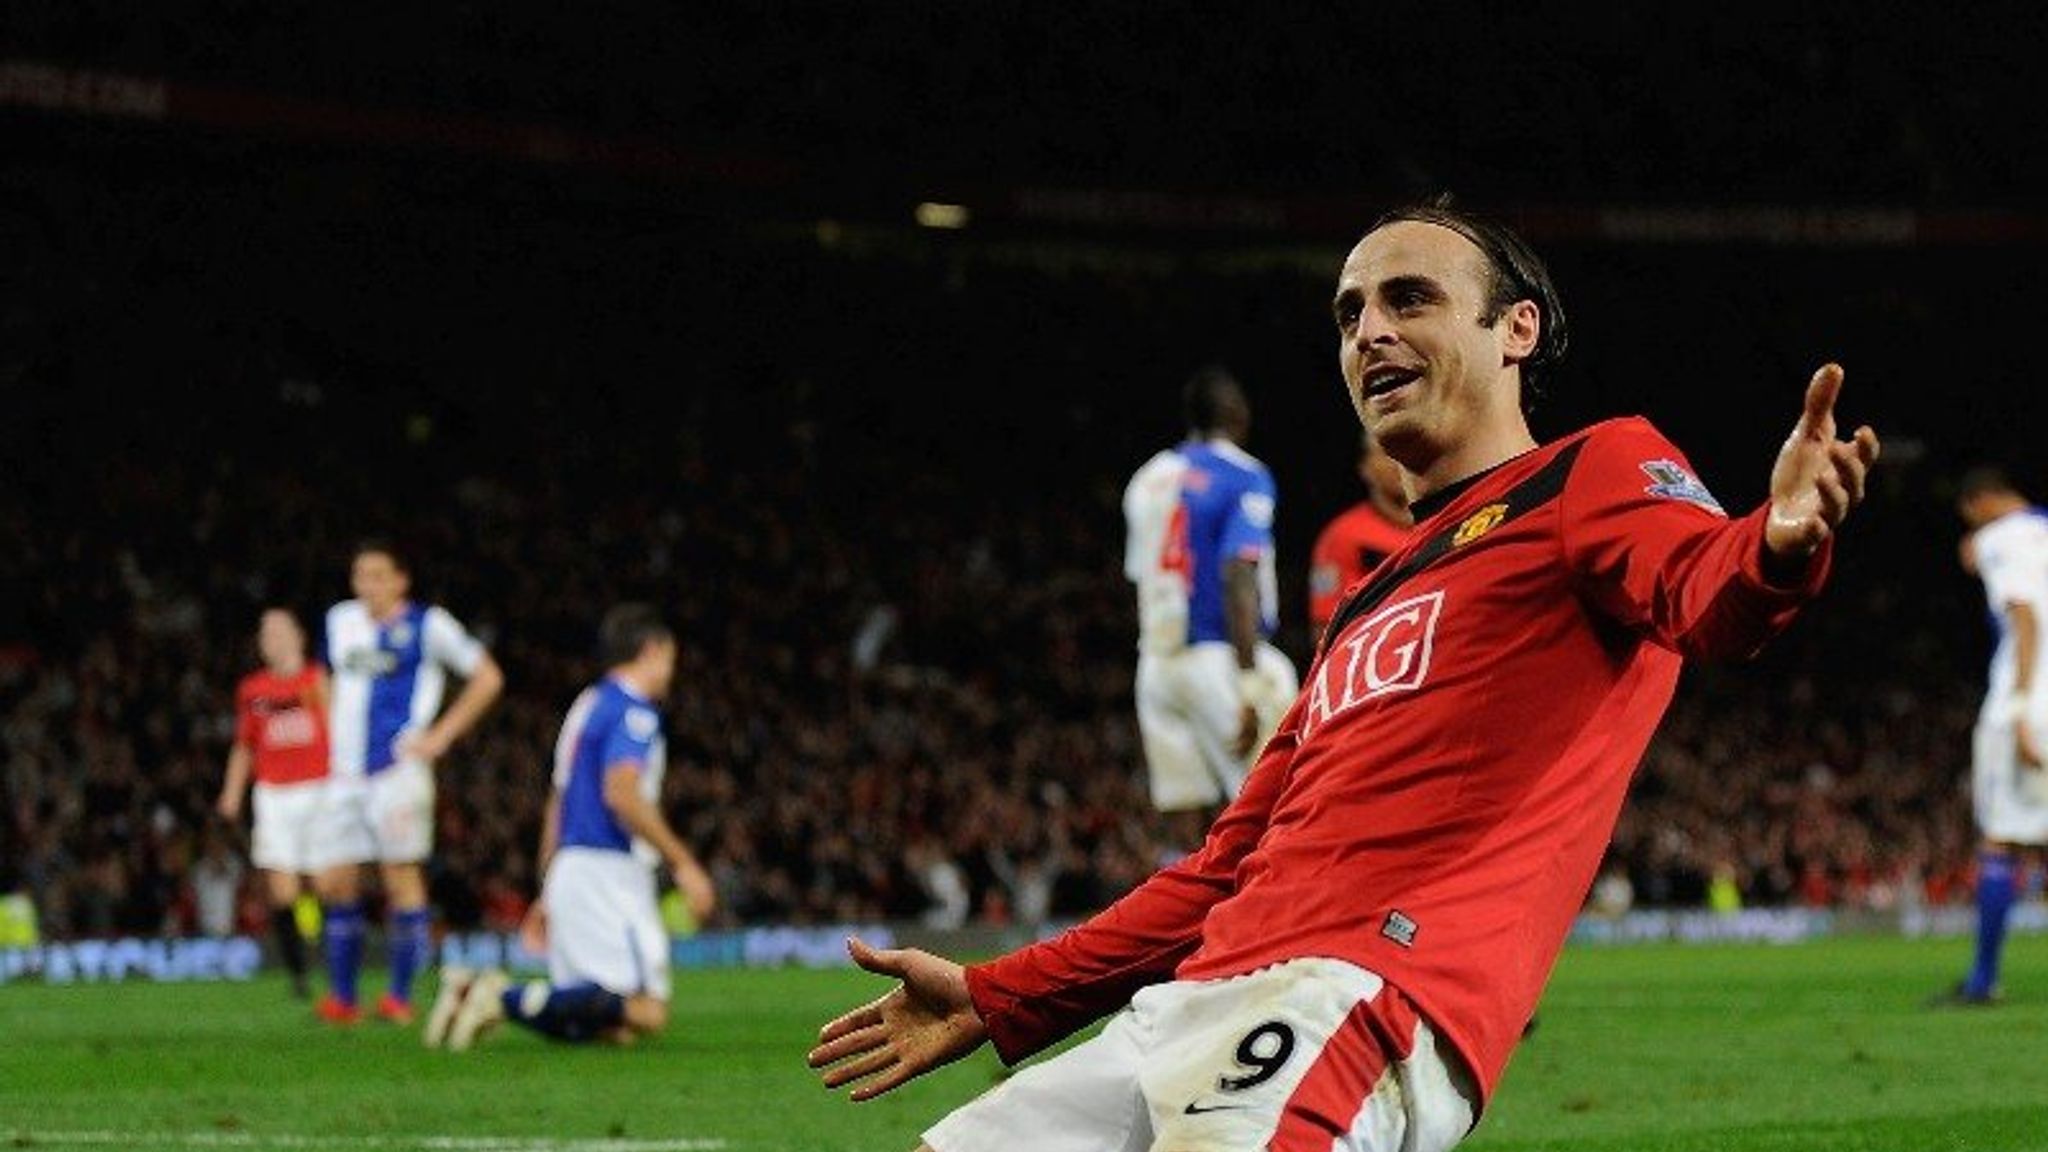 He Needs To Do Better: Dimitar Berbatov Lashes Out Manchester